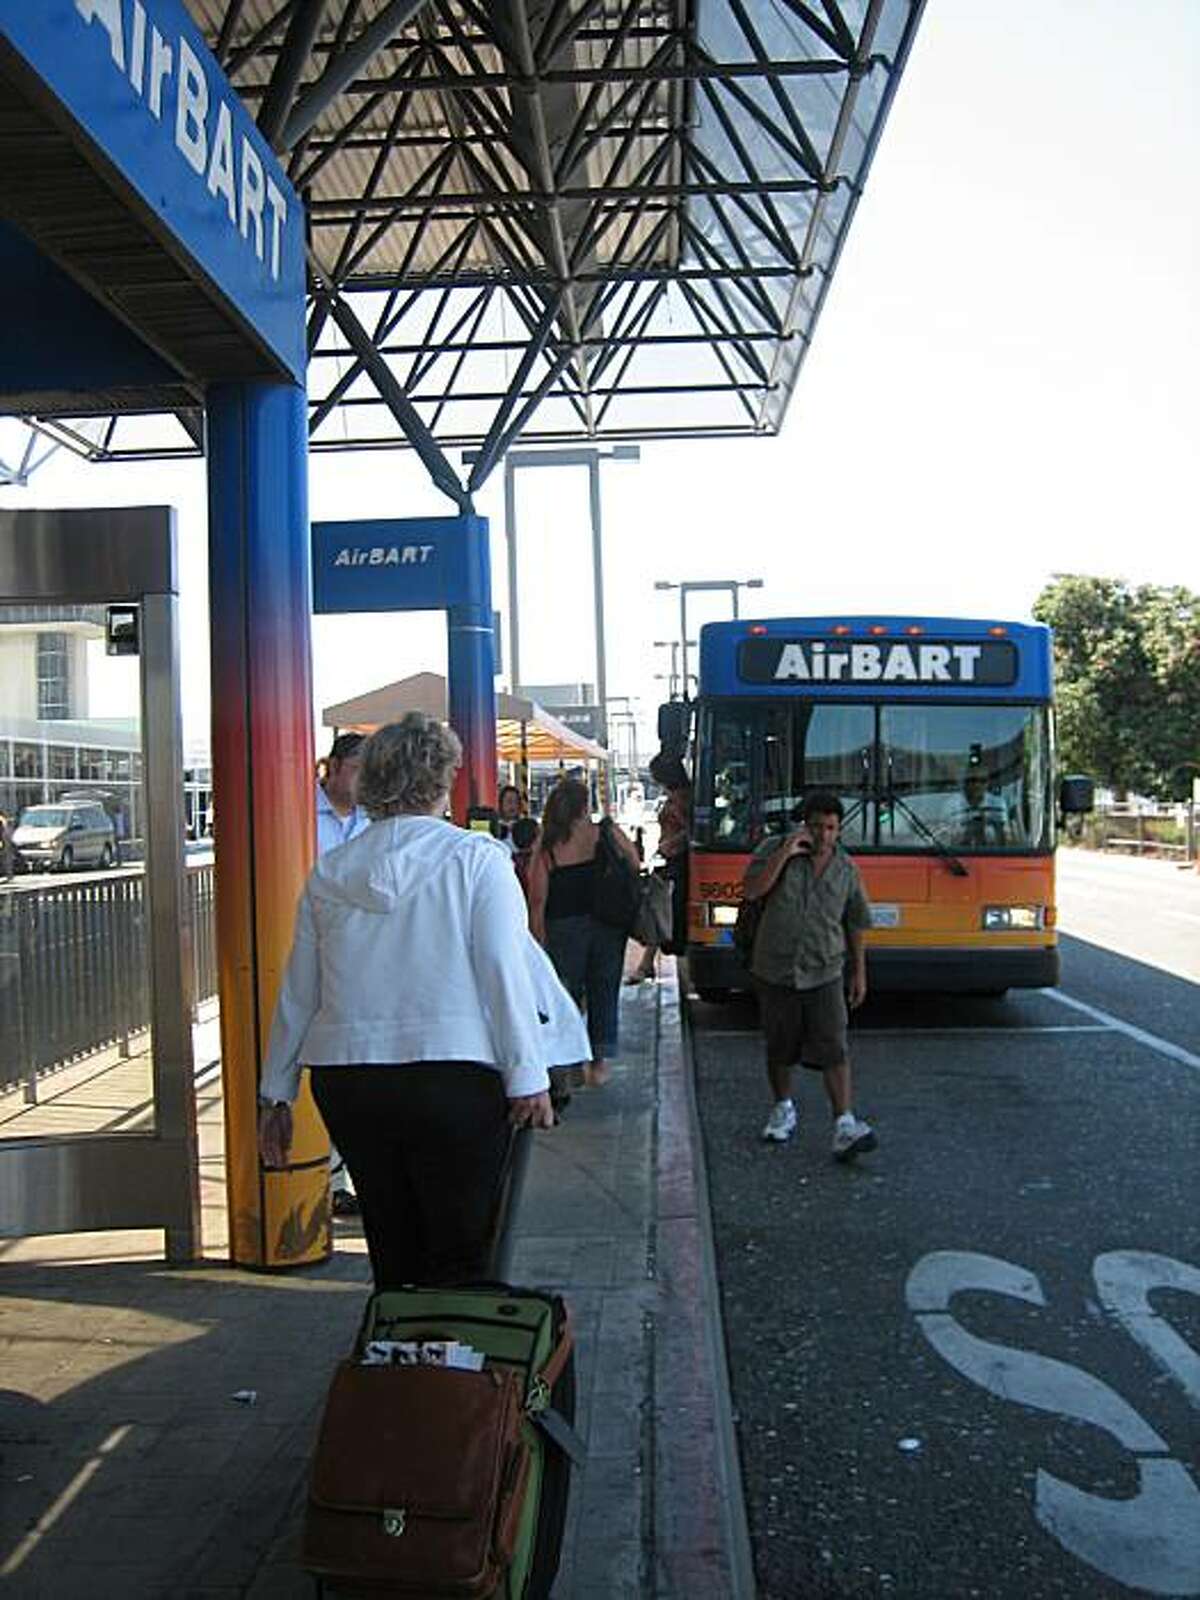 AirBart stops have been relocated, but the small signs do little to alert passengers waiting at old AirBart platforms.